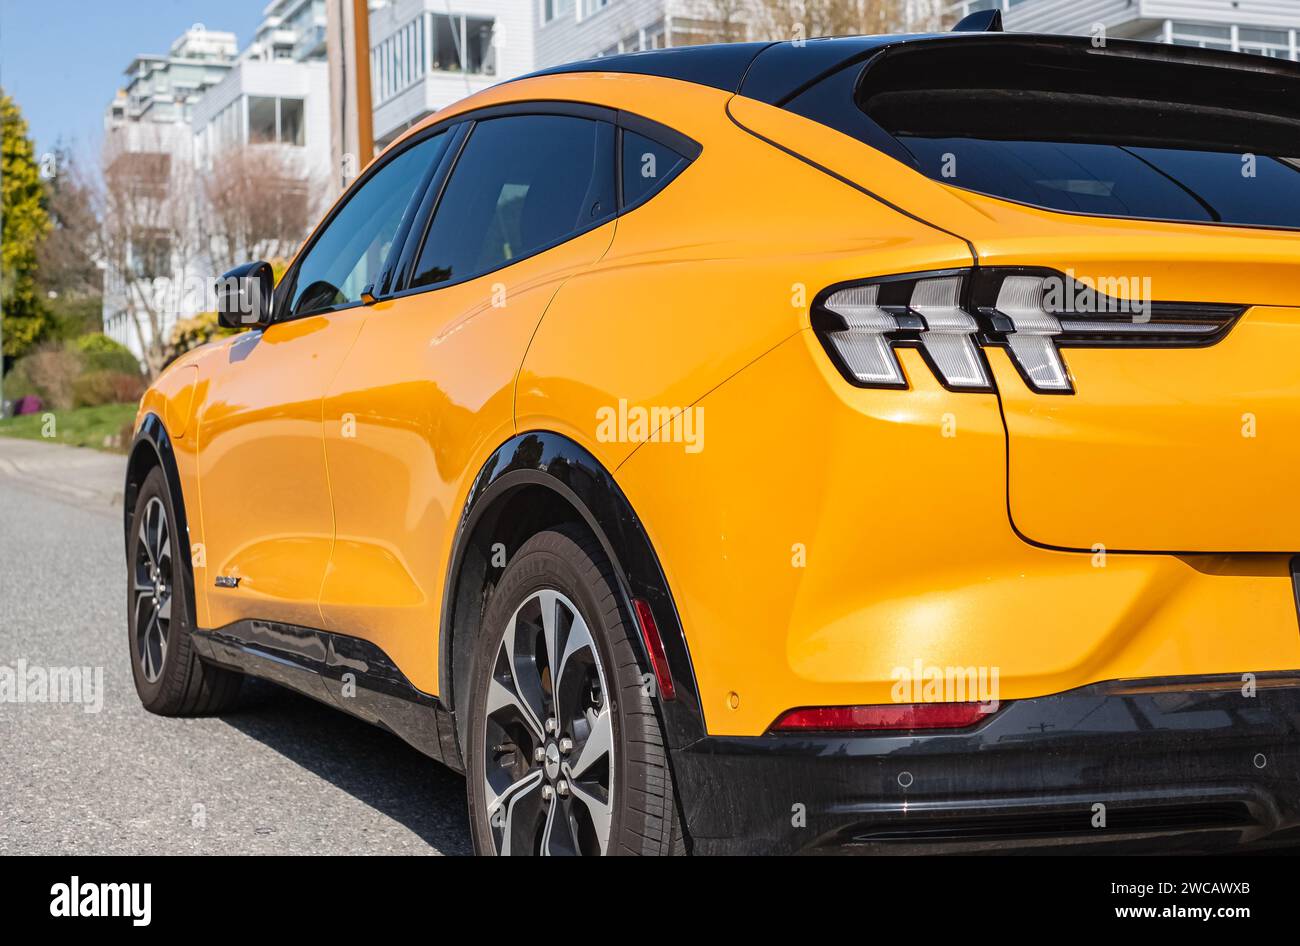 Yellow muscle car Ford Mustang. Headlights of yellow modern car. Back view. Ford Mustang GT parked on road side. Street photo, nobody-Vancouver Canada Stock Photo